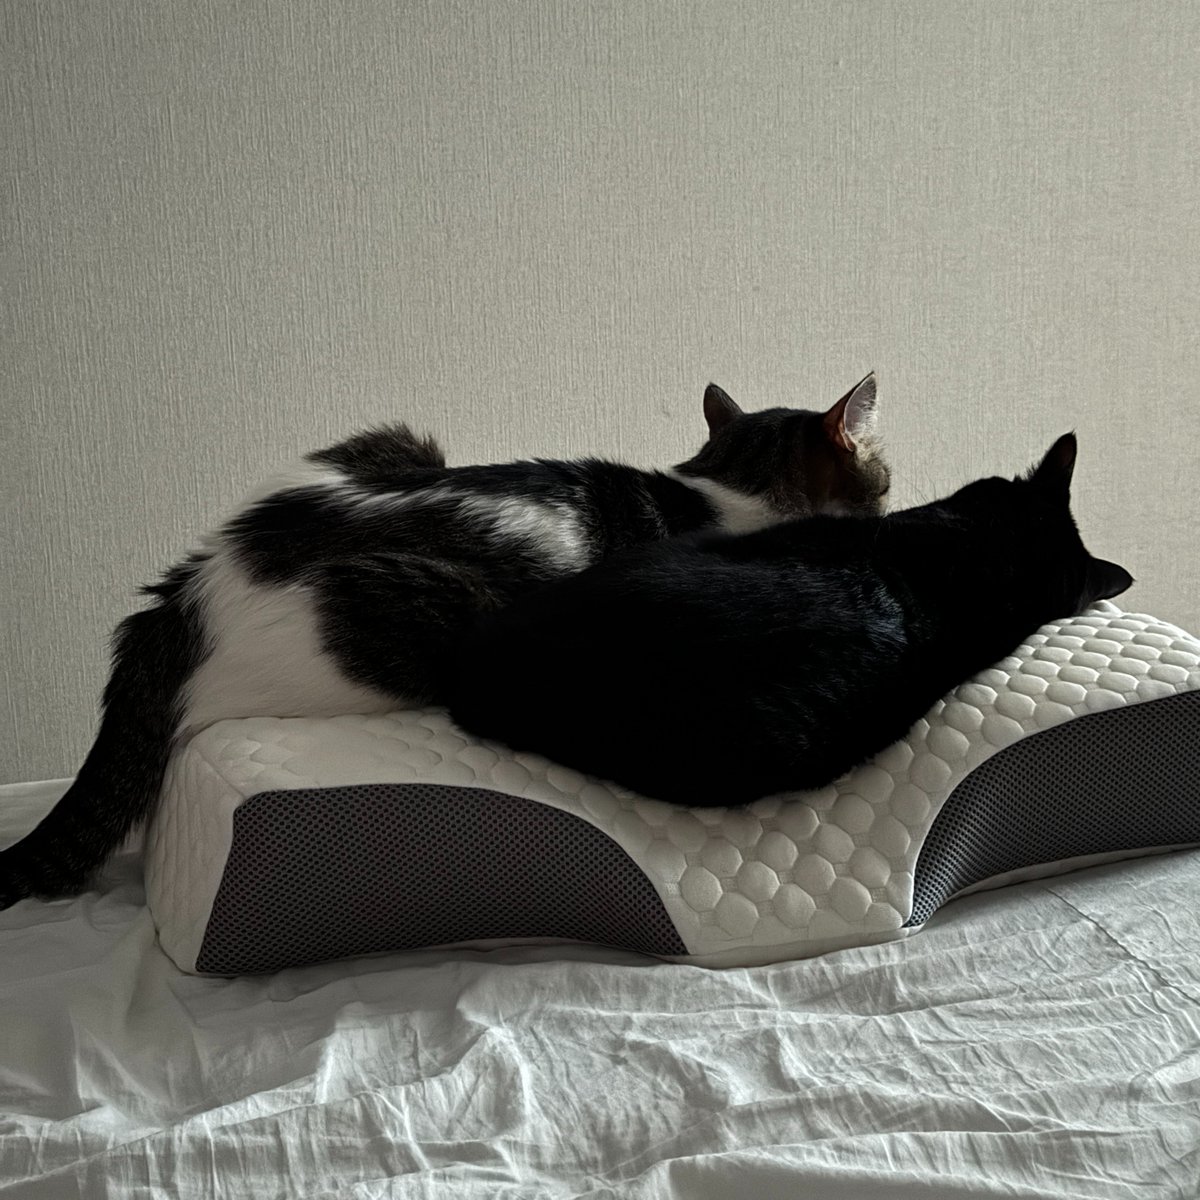 I don't know why, but my cats love memory form pillows